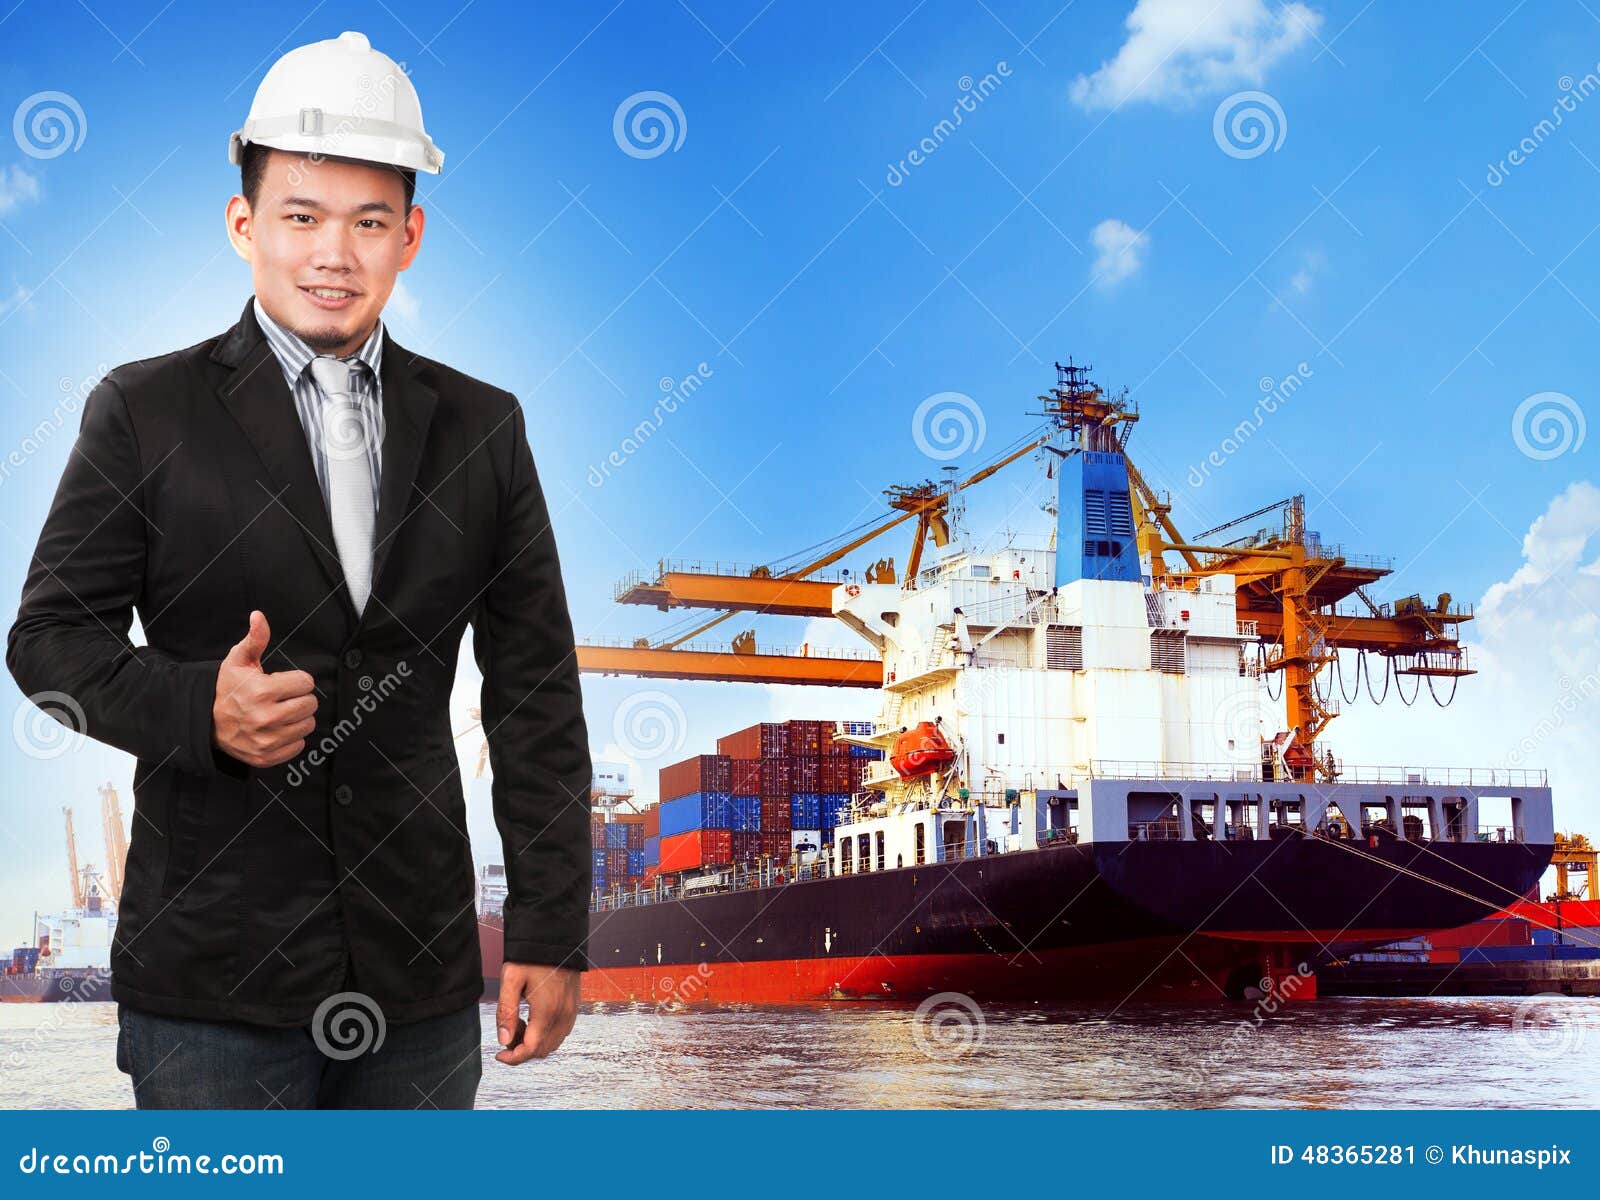 business man and comercial ship with container on port